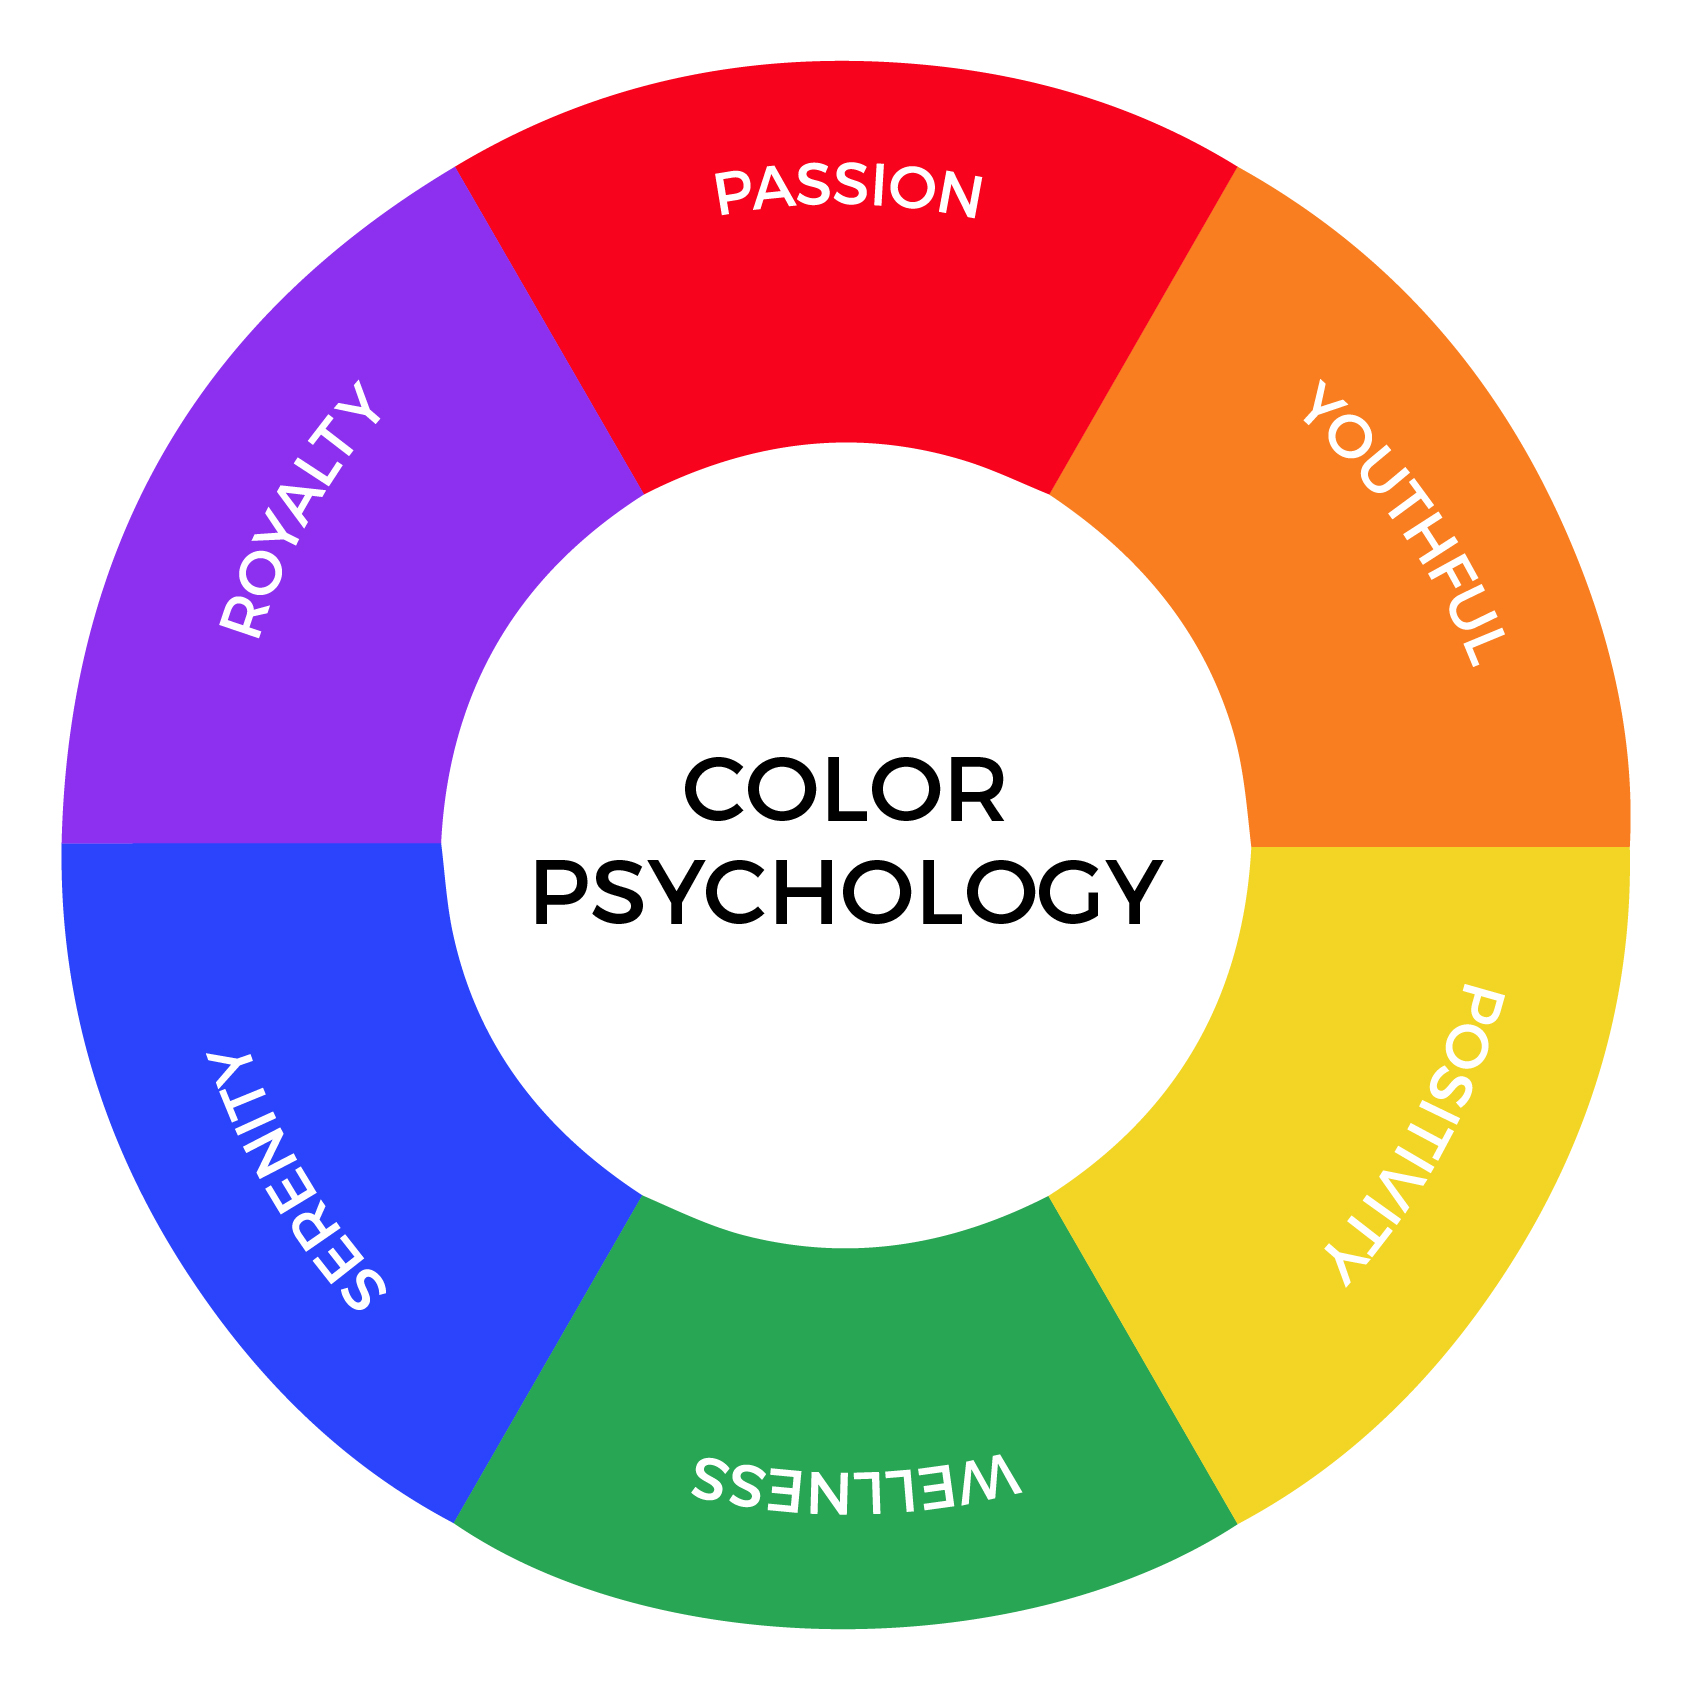 color wheel pro color meaning blue